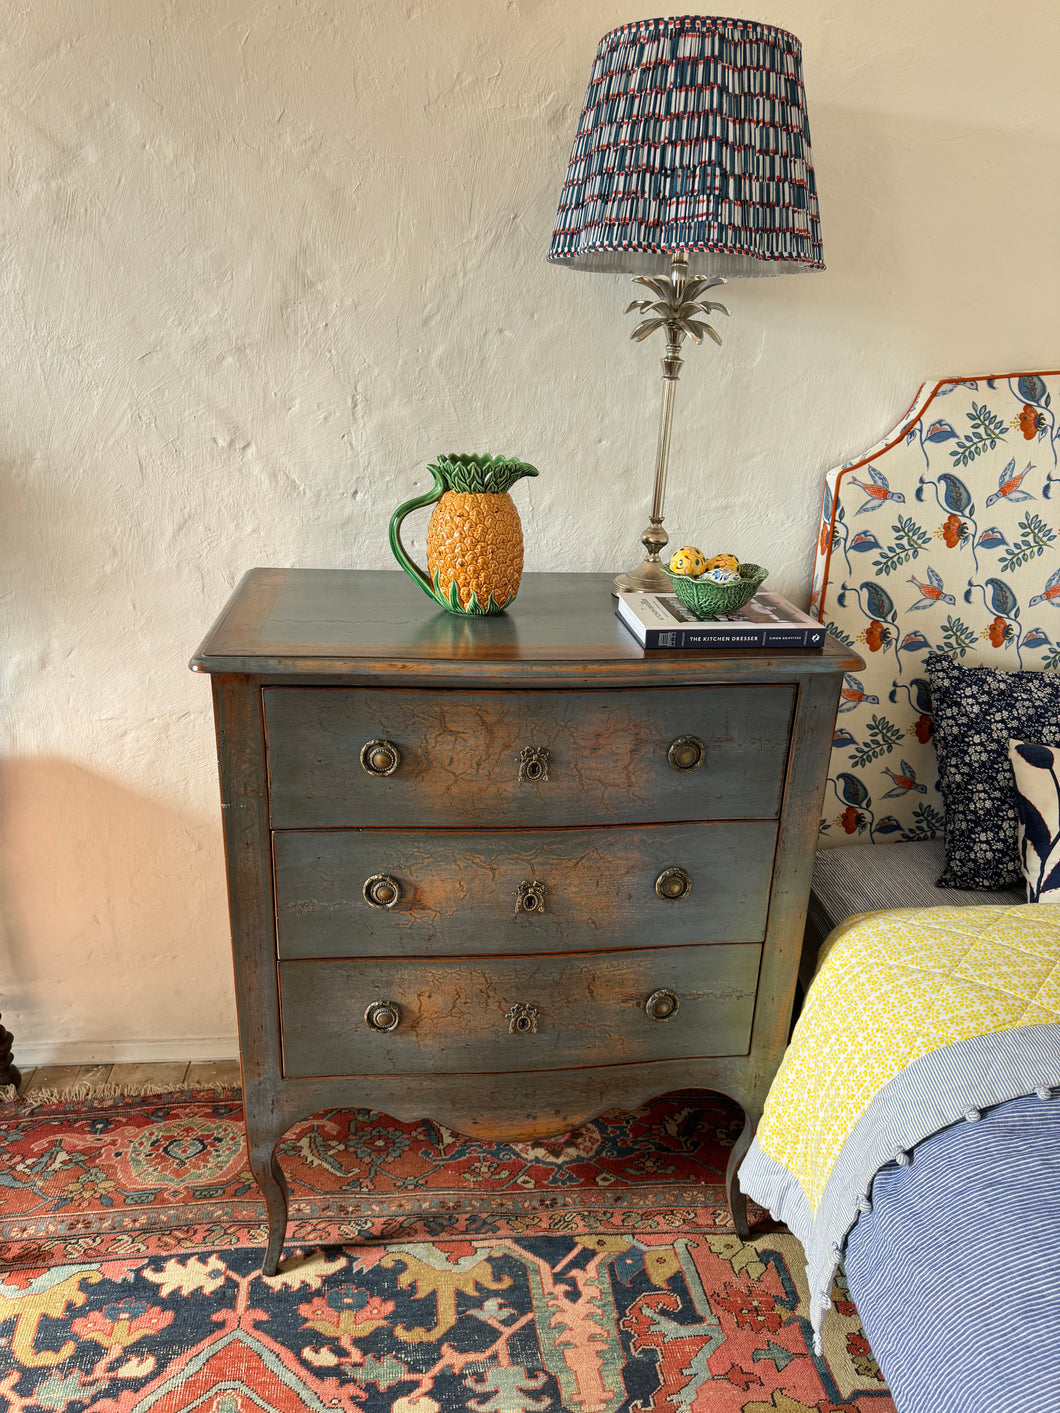 Dainty French provincial chest of drawers